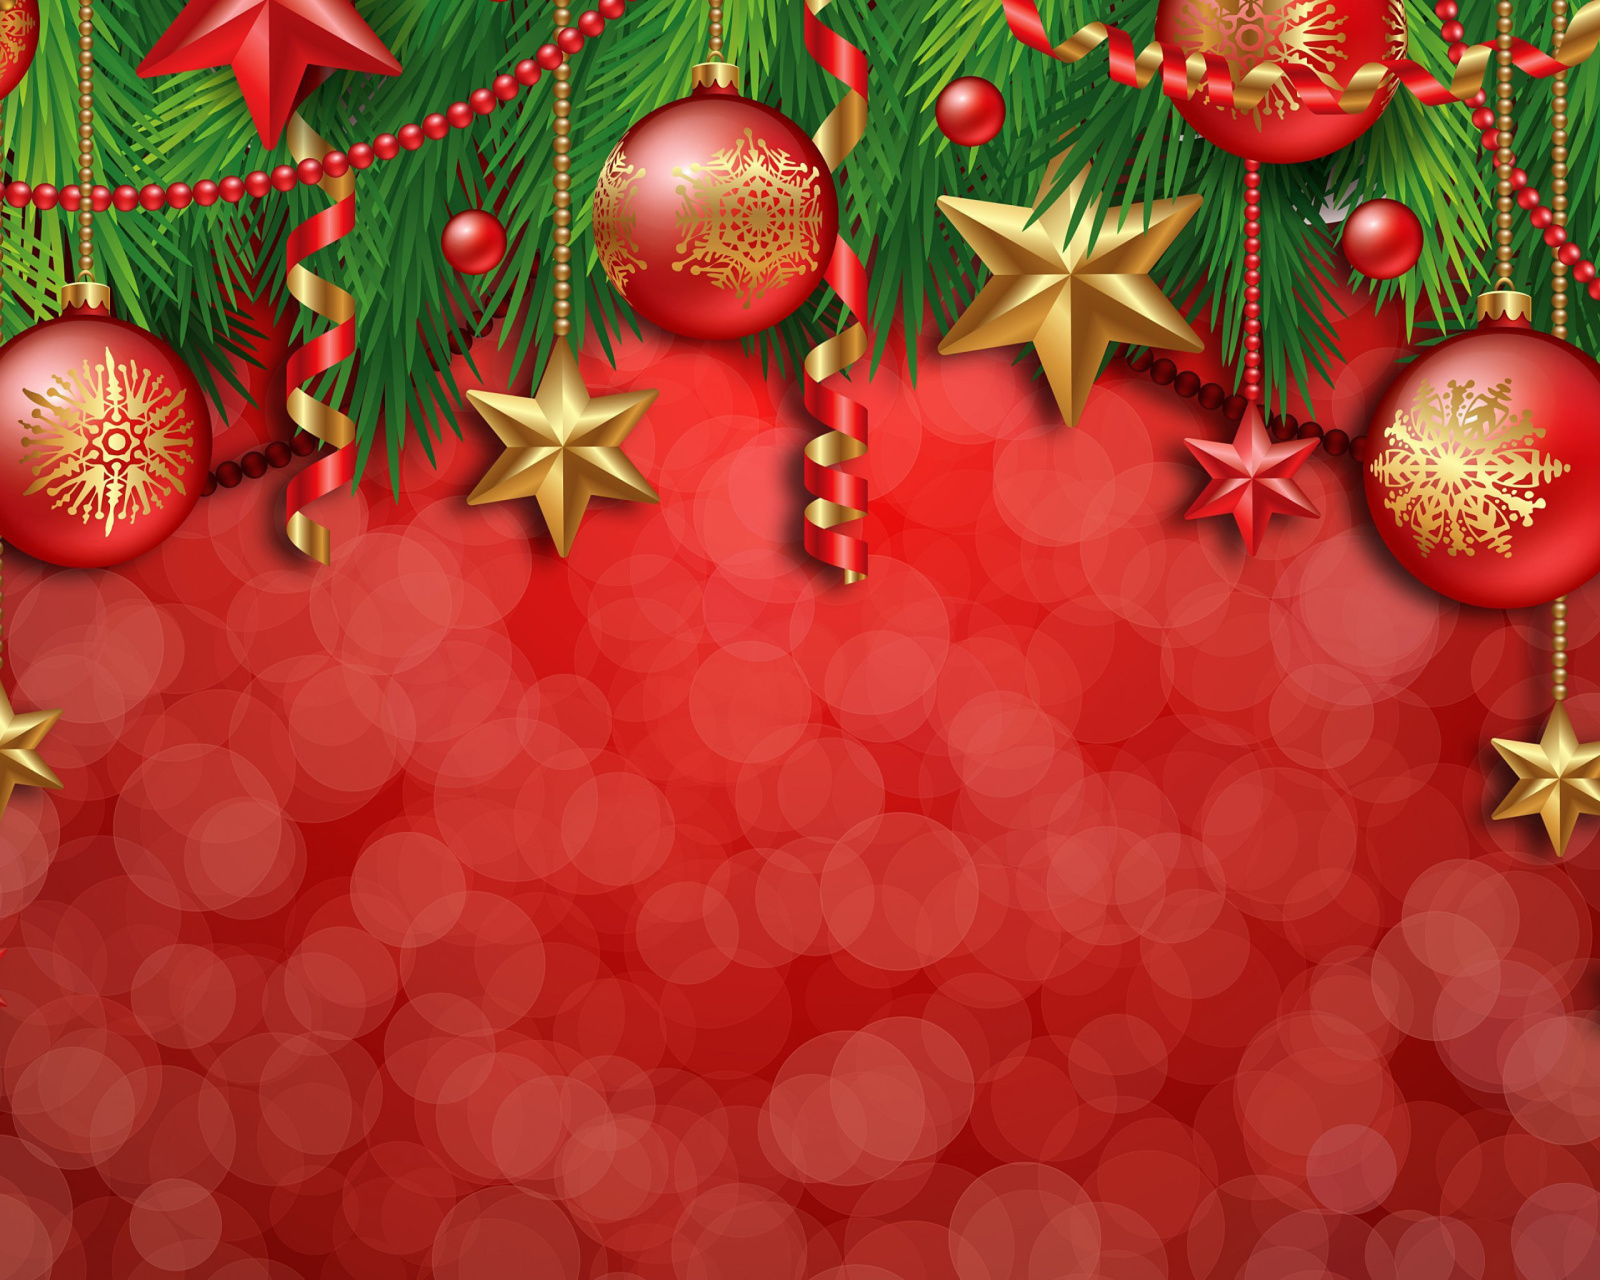 Red Christmas Decorations wallpaper 1600x1280